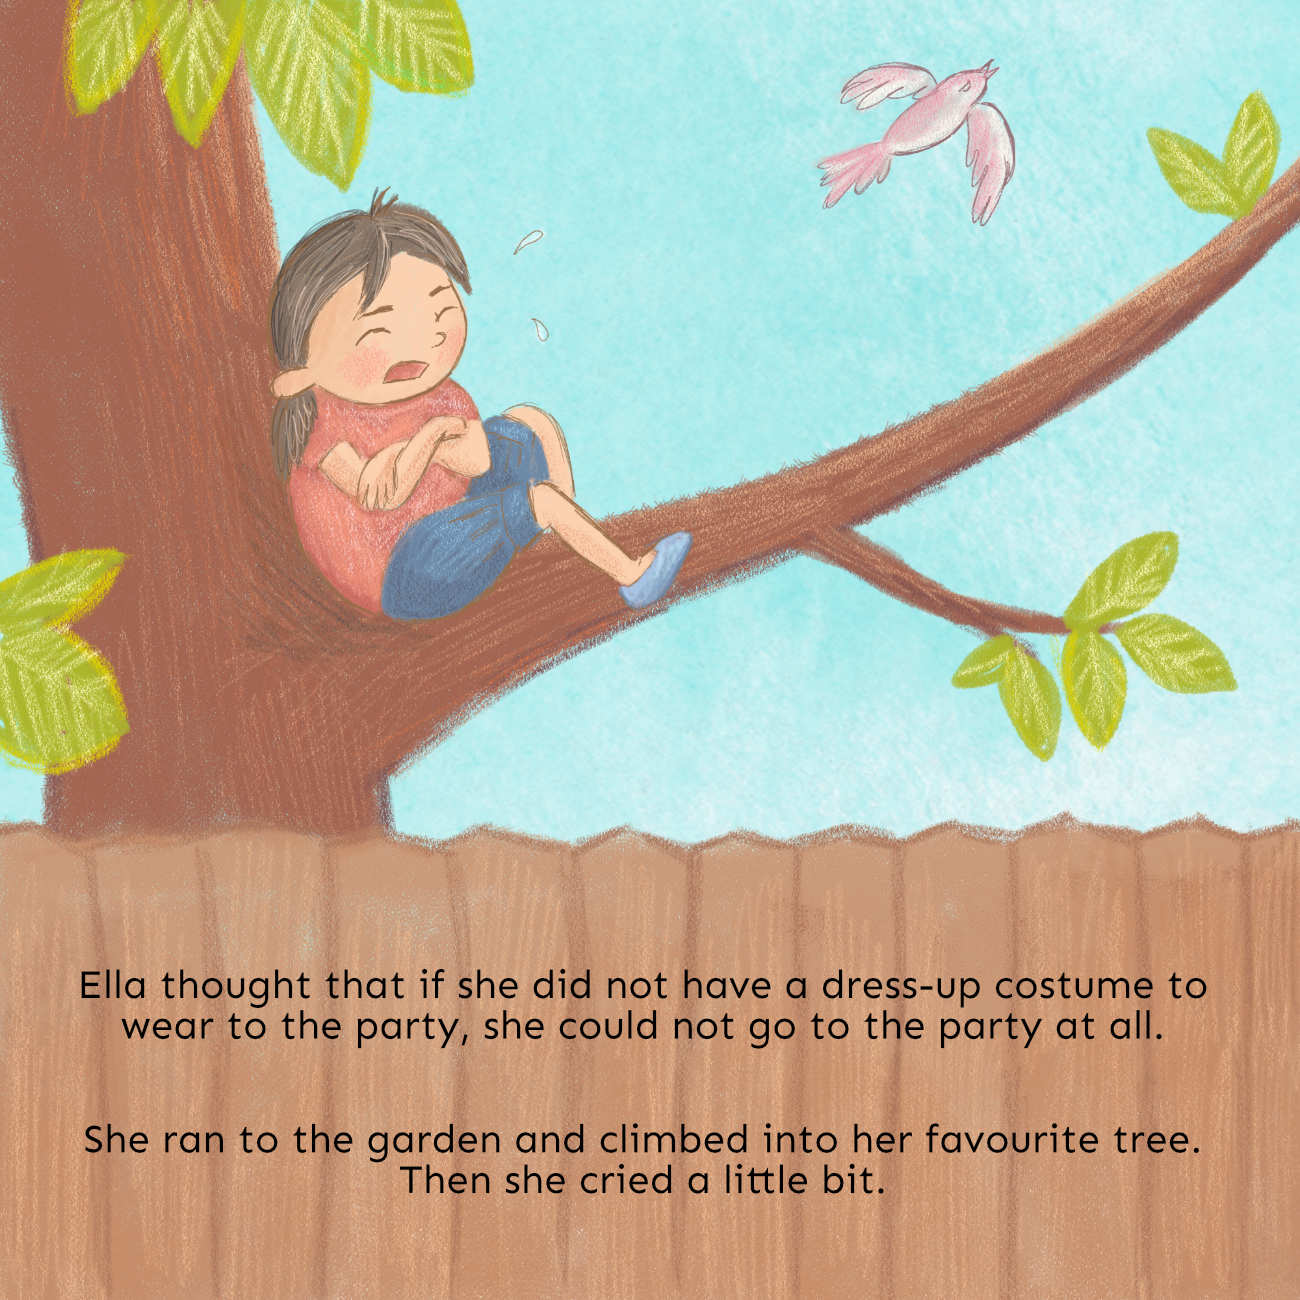 Feel Good Fairy Tales - Cinderella by Jade Maitre - free books online page 9